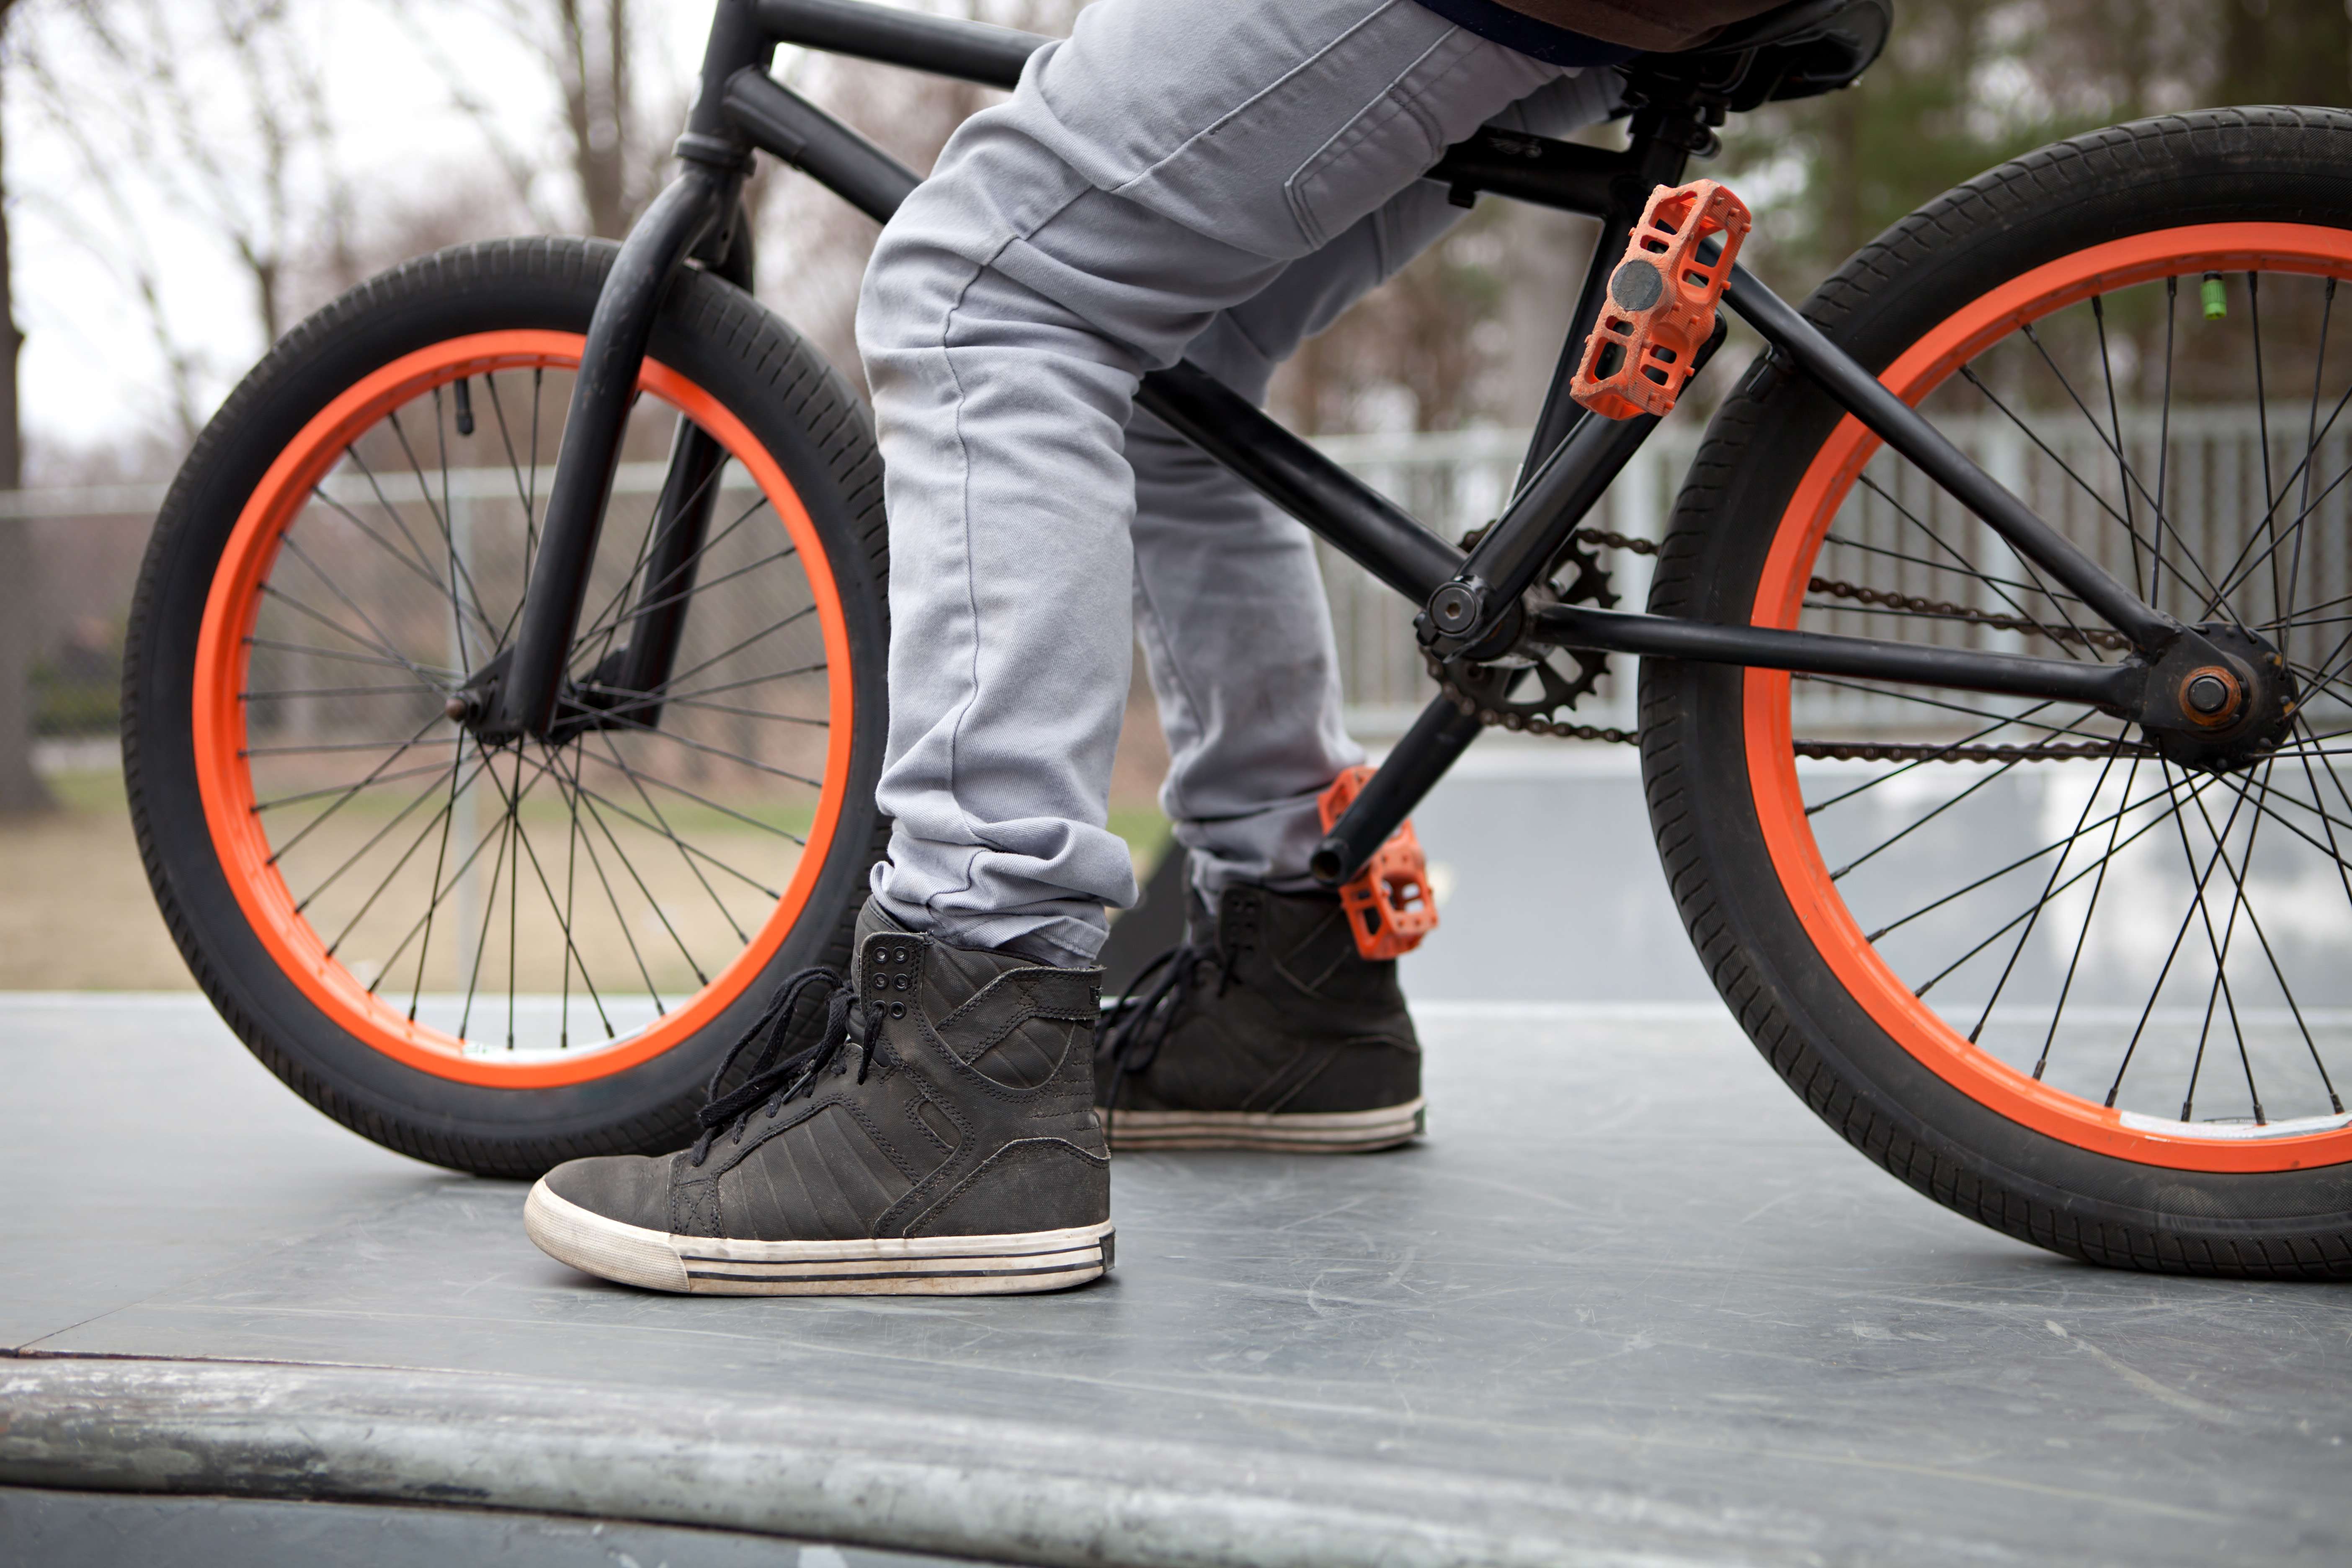 best bmx tires for street and park